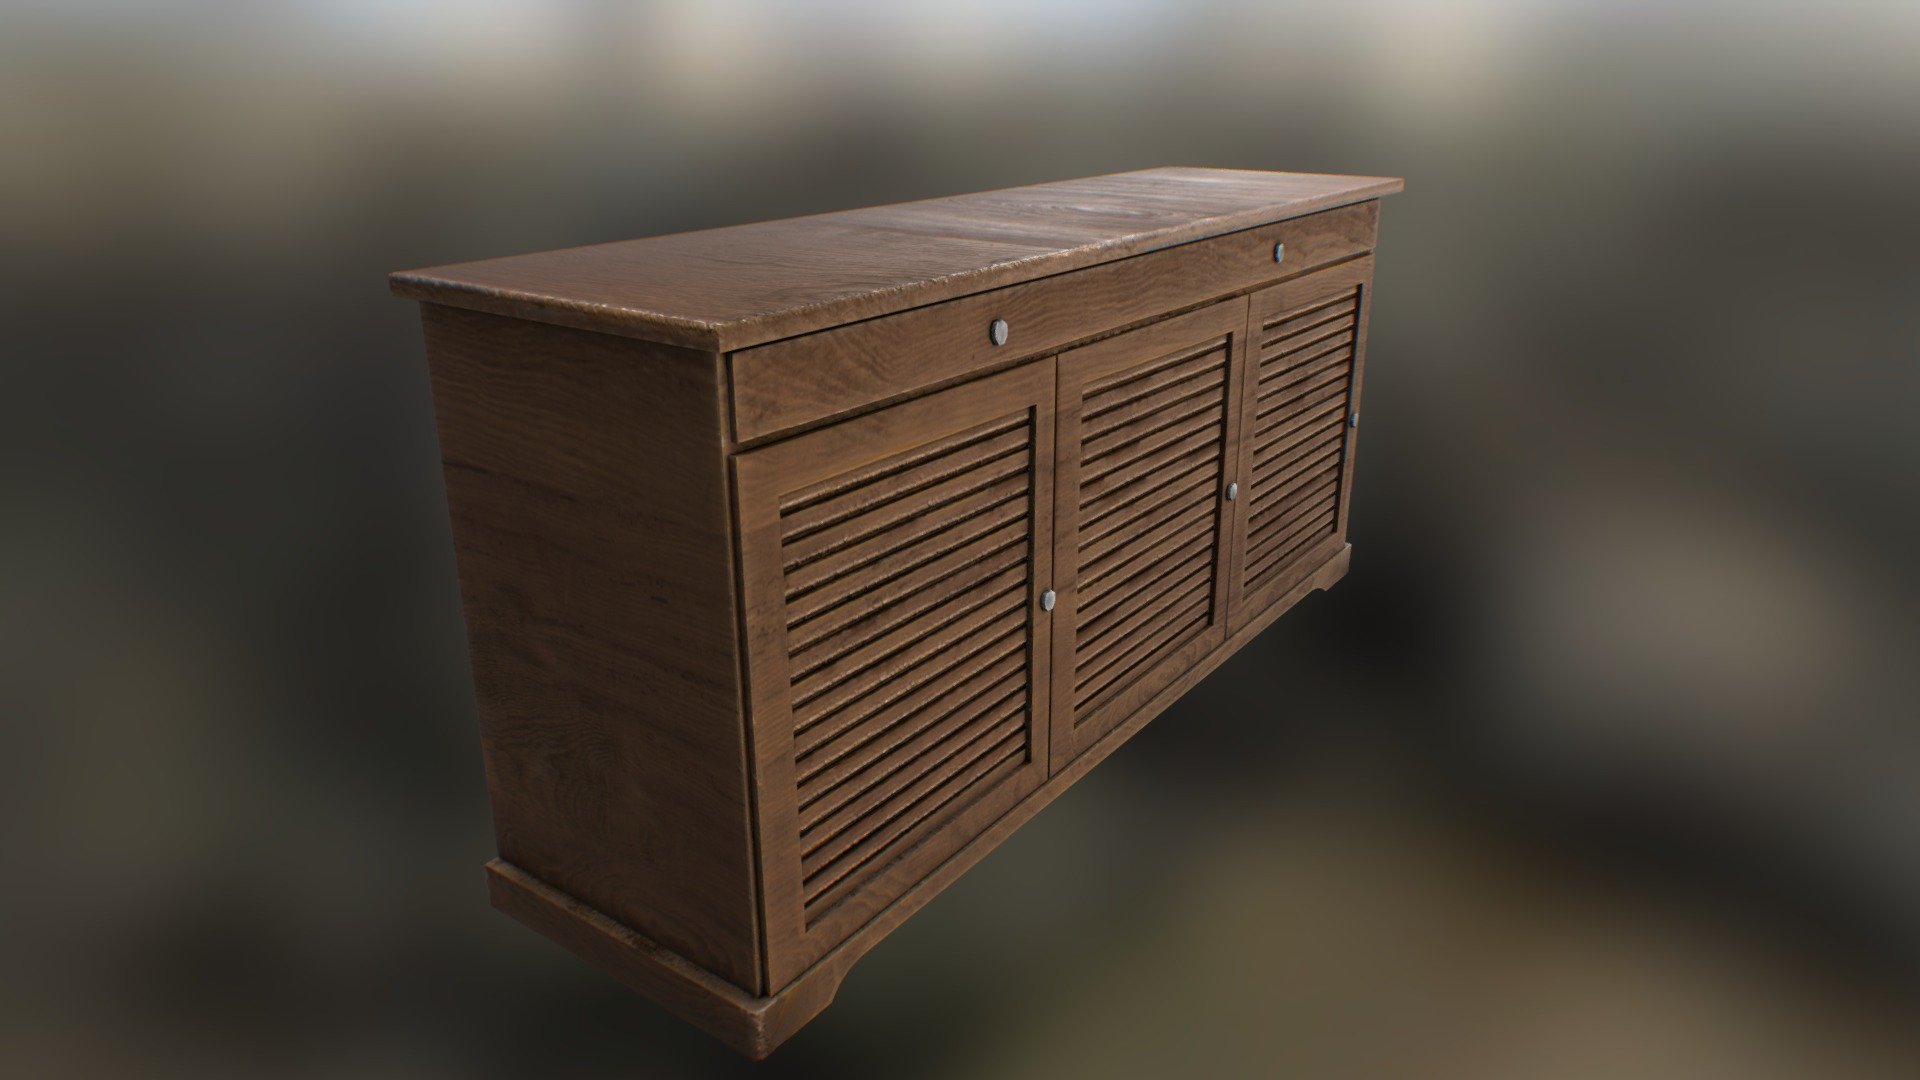 Low poly furniture 3d model